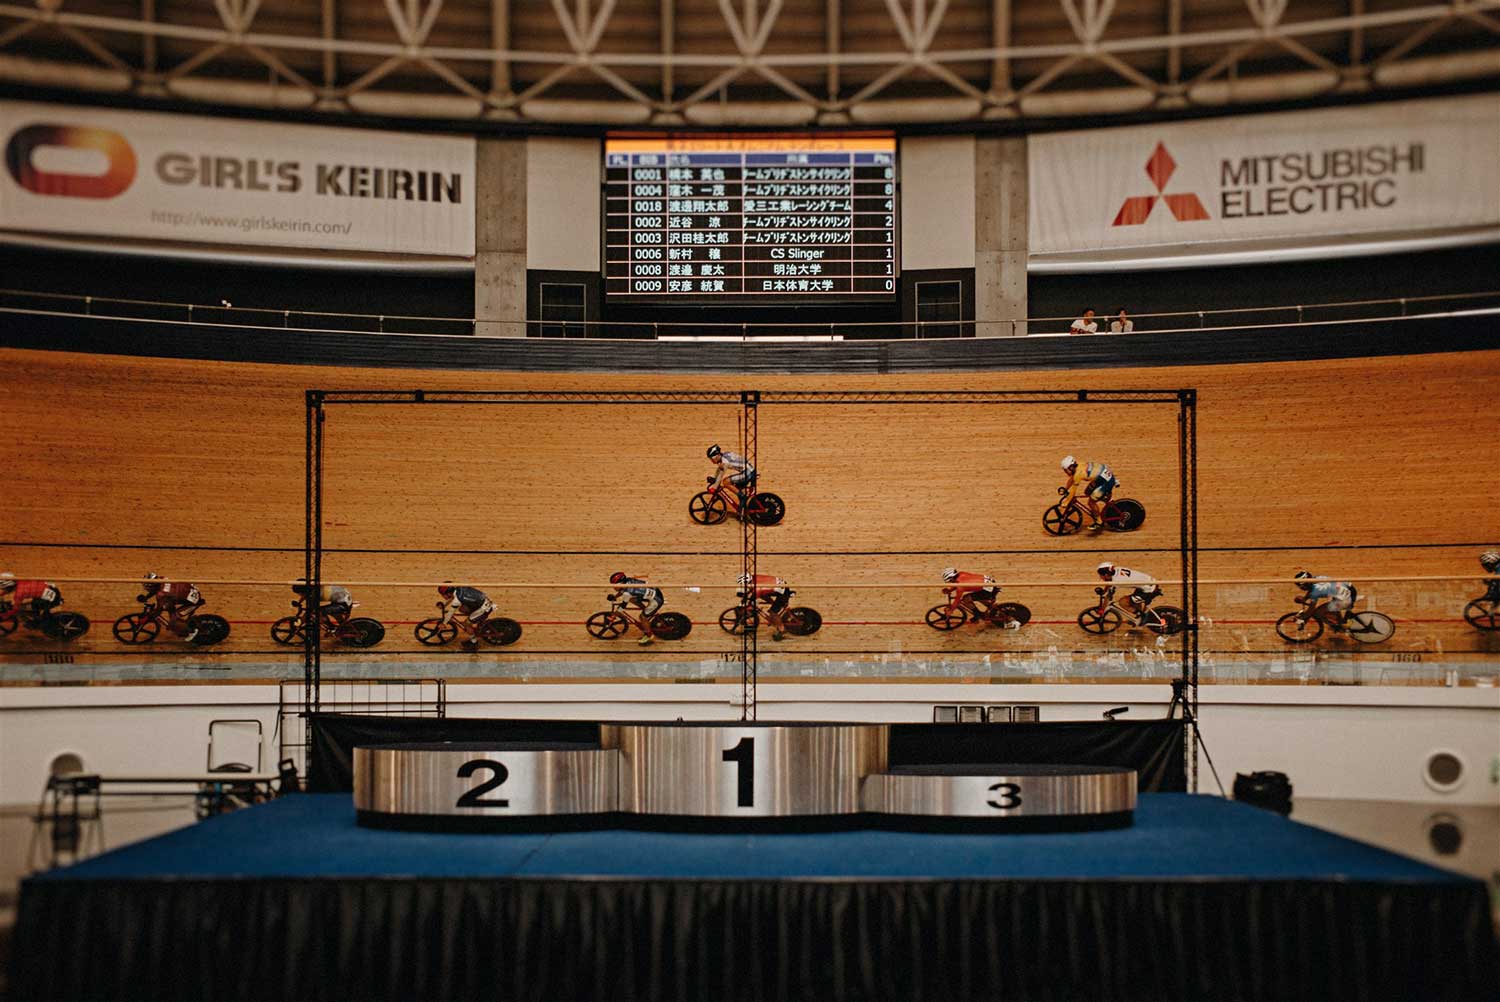 Japanese national track cycling championships event goes on behind podium